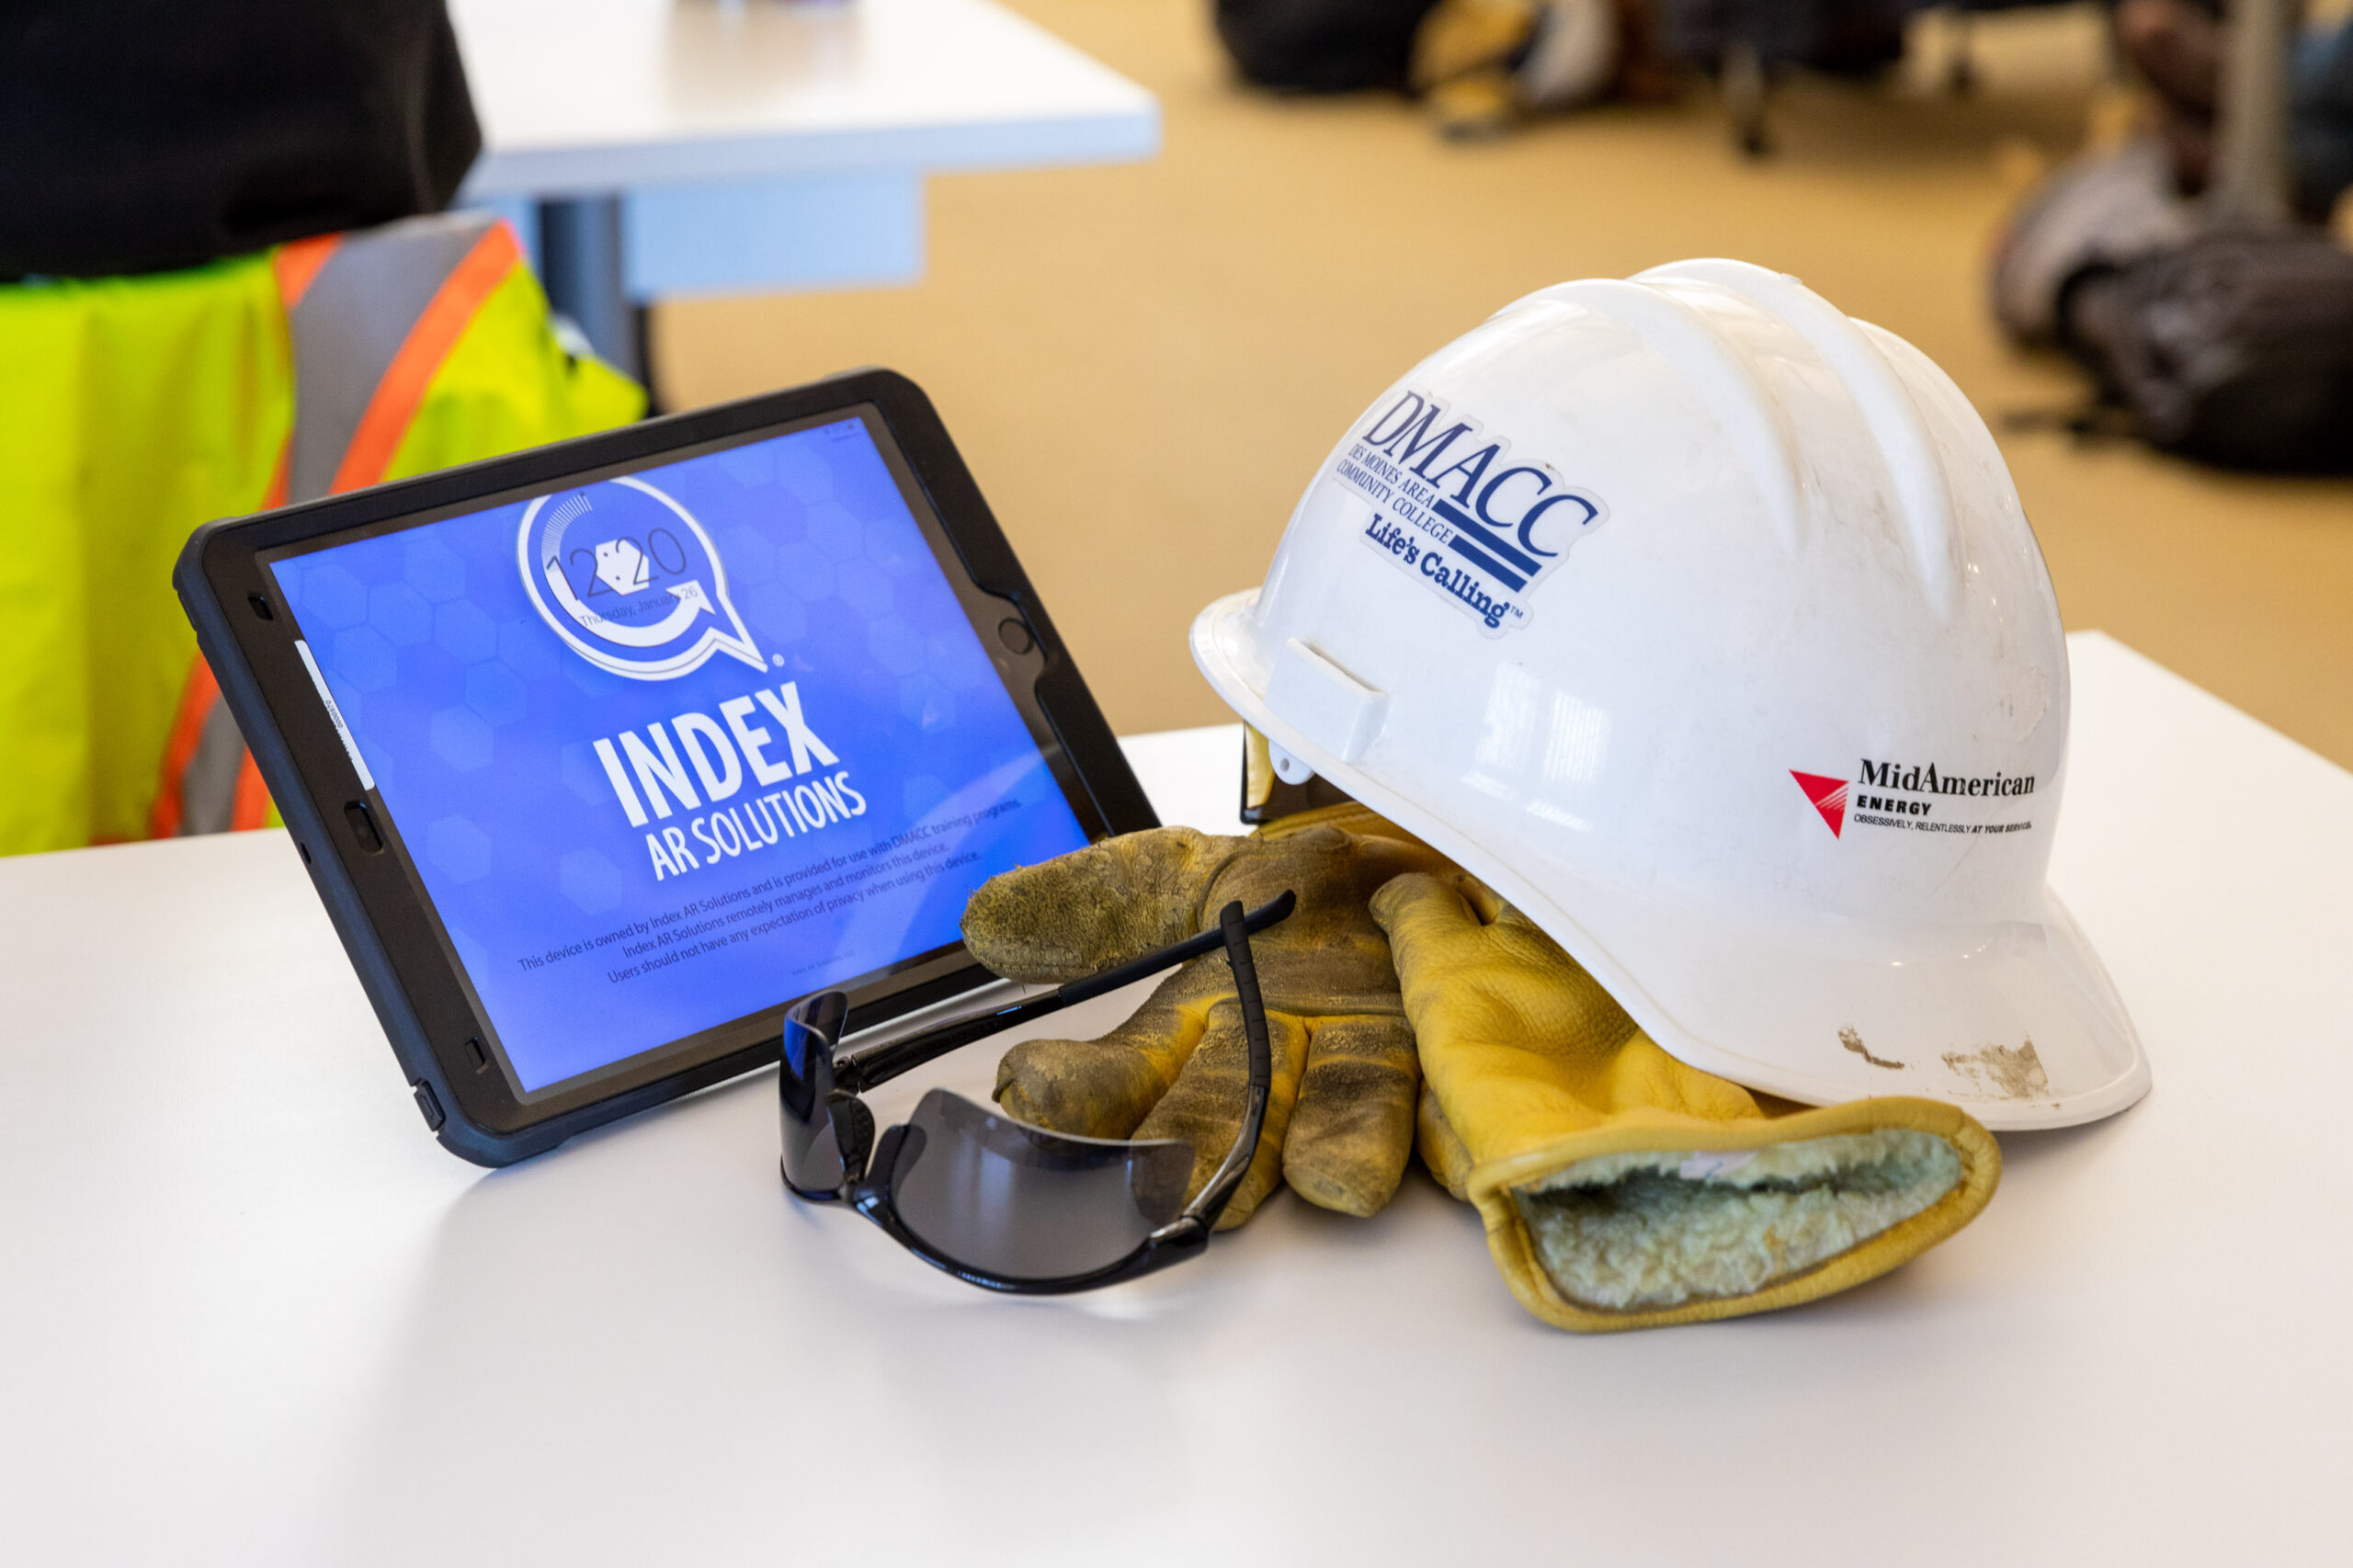 Hard hat with gloves and tablet